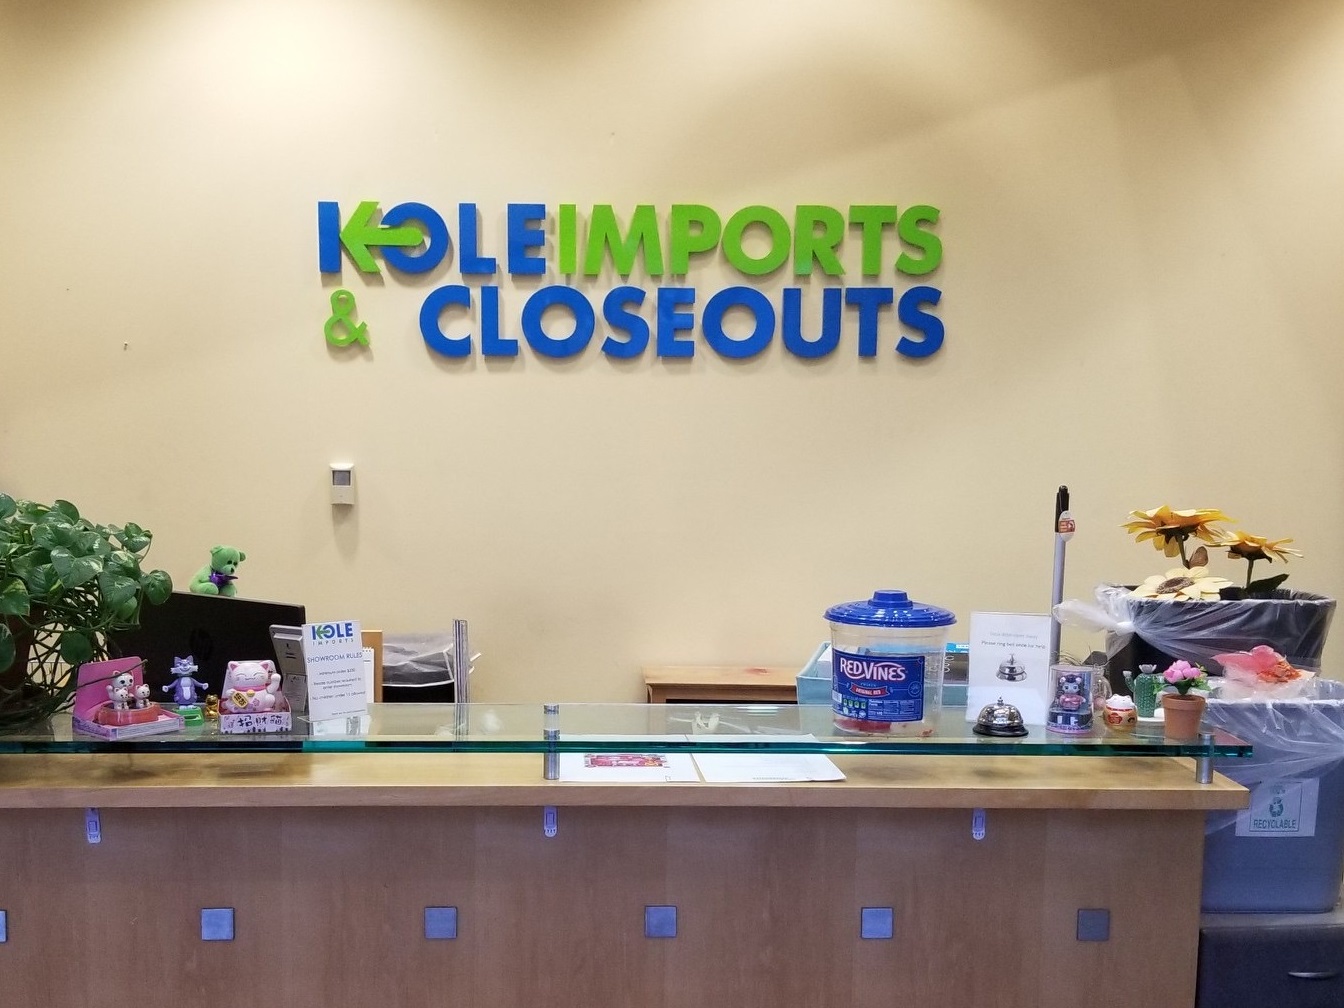 You are currently viewing Acrylic Lobby Sign for Kole Imports in Carson, South Bay